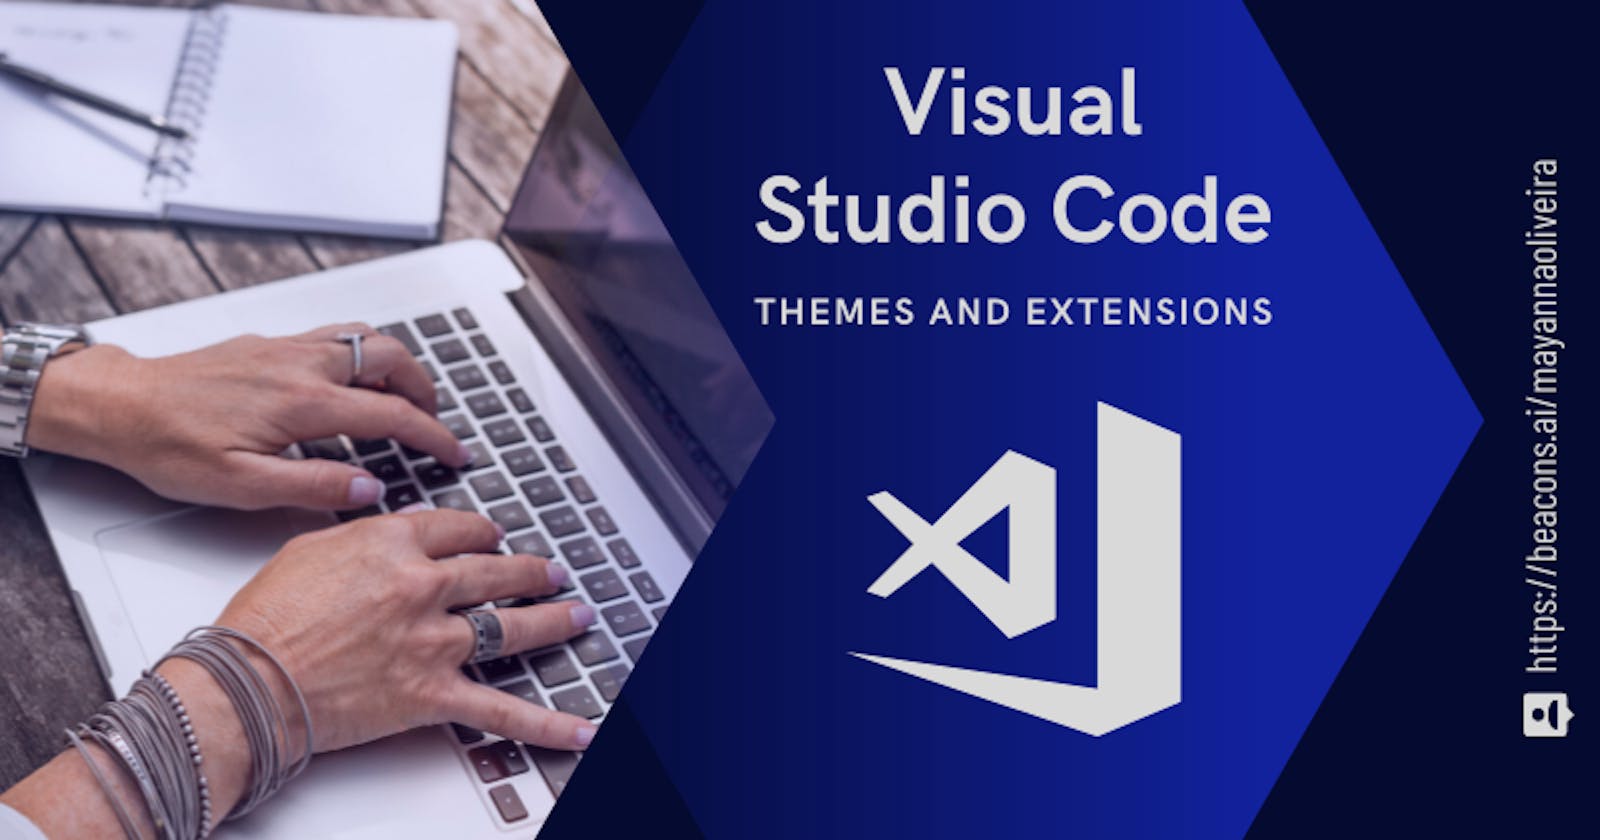 List of my favorite themes and extensions on Visual Studio Code